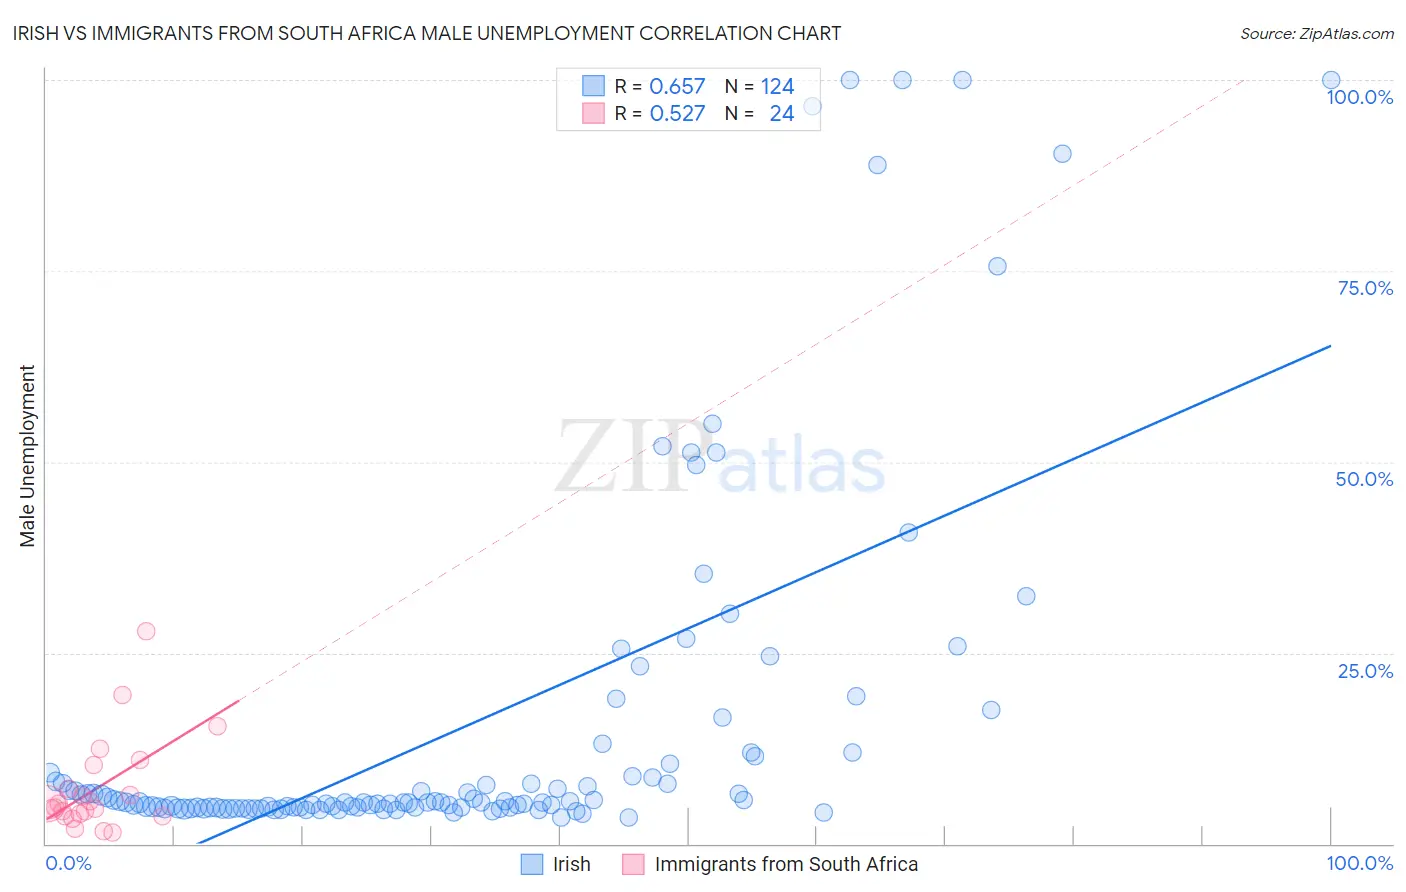 Irish vs Immigrants from South Africa Male Unemployment